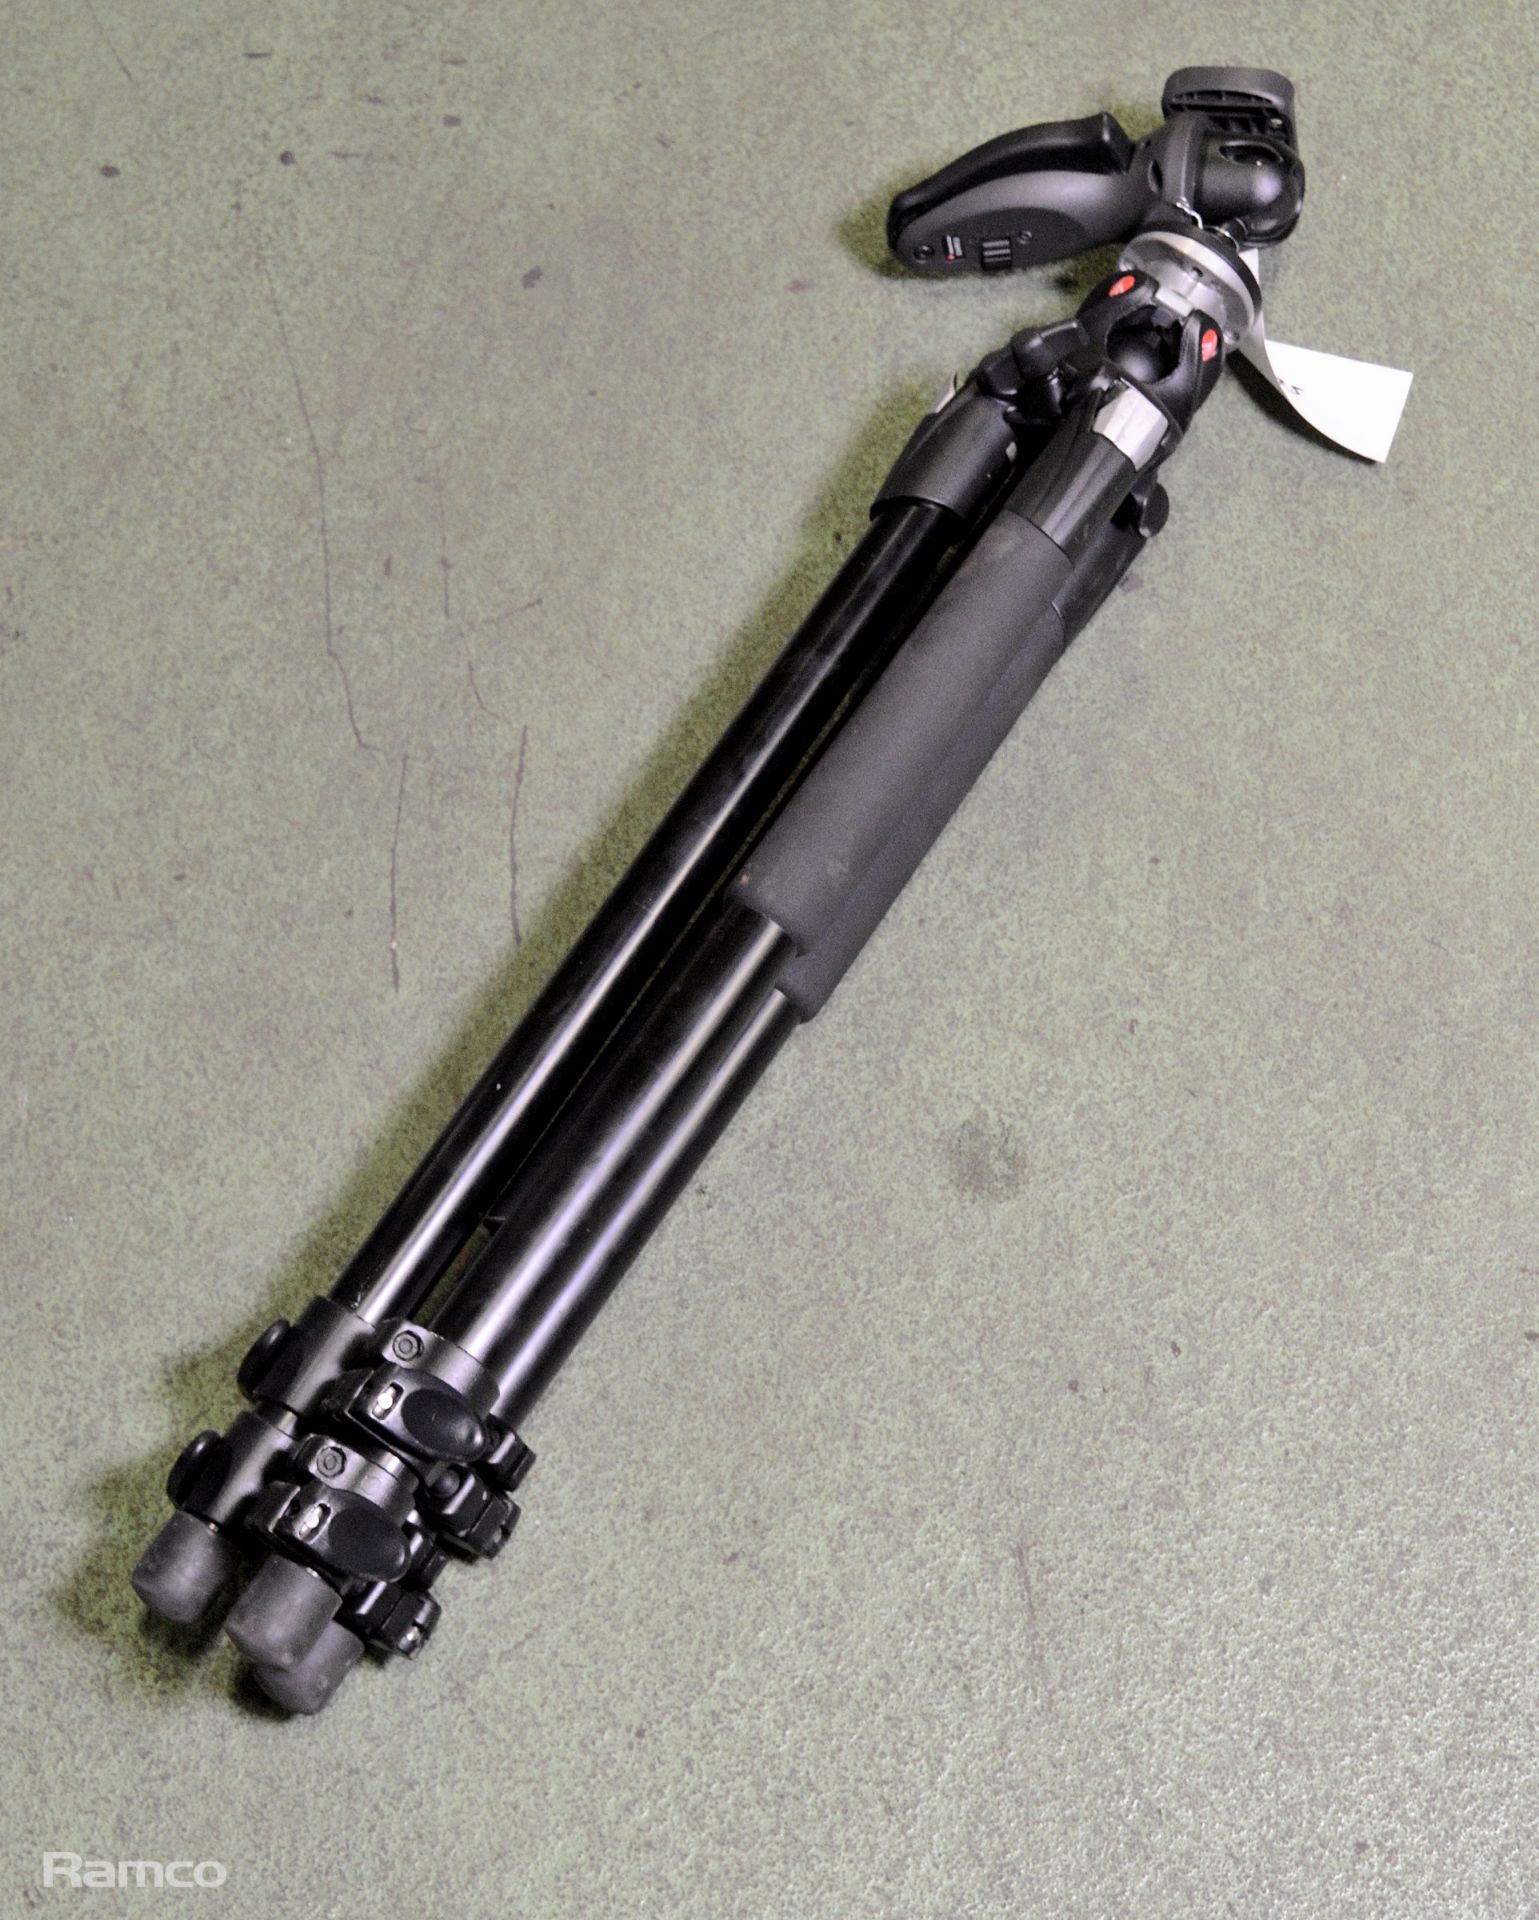 Manfrotto 055XPROB Tripod - Image 5 of 5